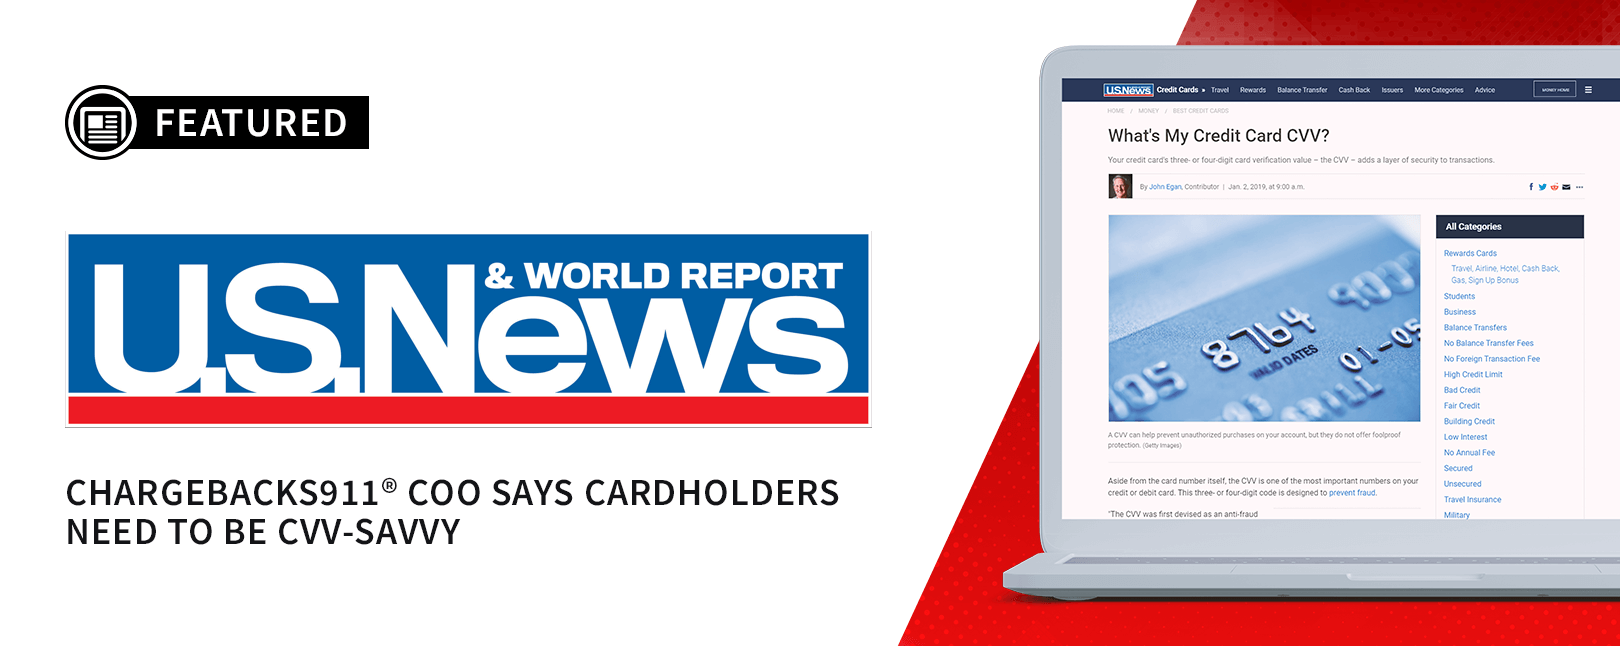 US News and World Report Feature